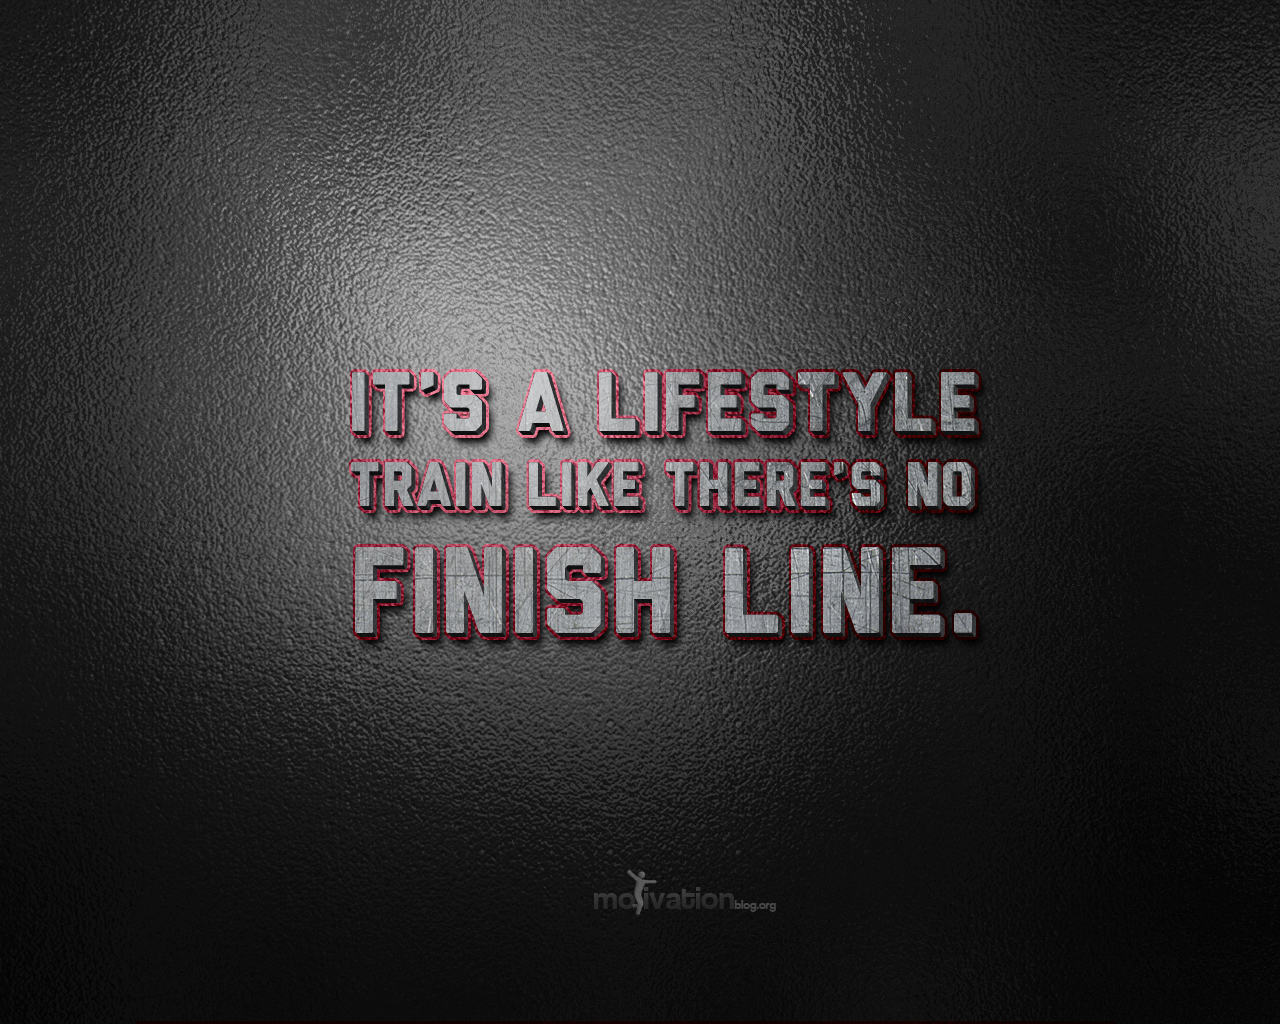 Workout Quotes Nike Motivational Wallpaper QuotesGram